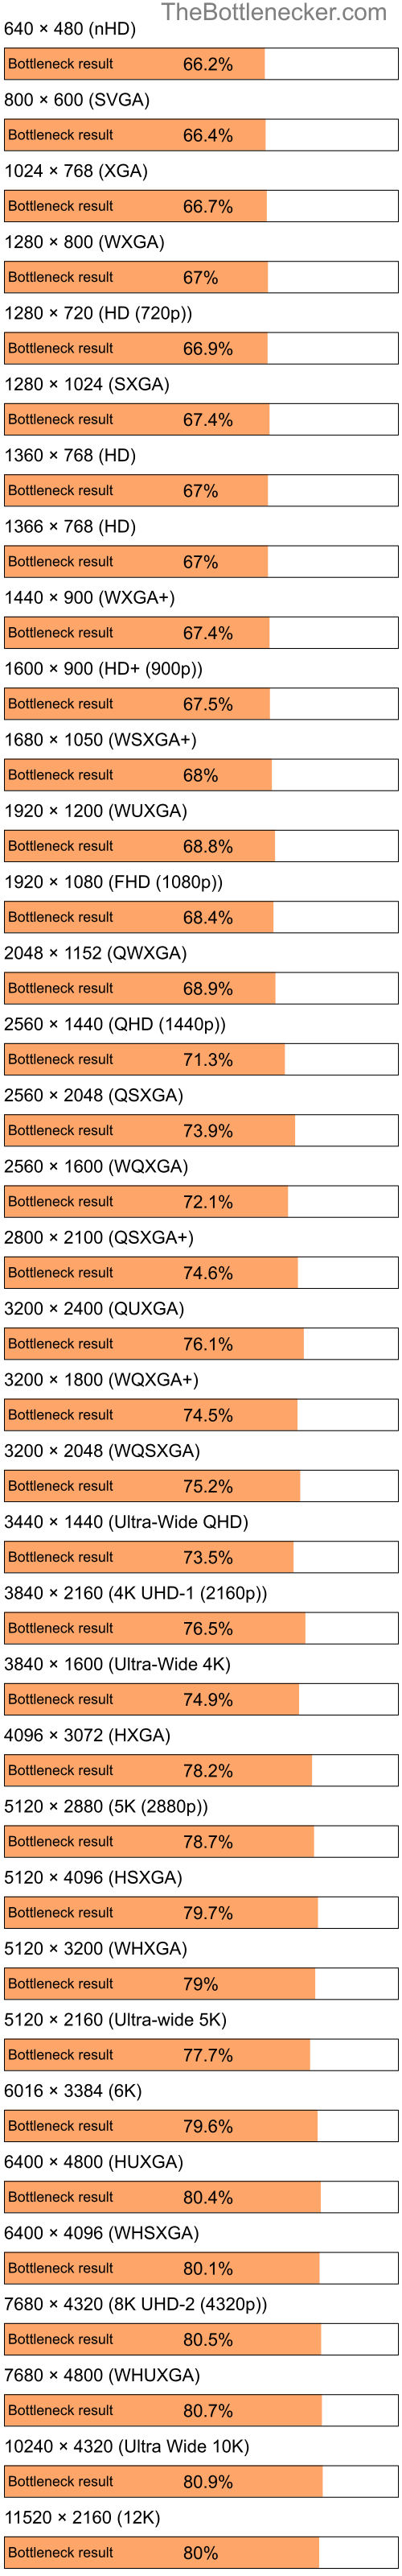 Bottleneck results by resolution for Intel Atom Z520 and AMD Radeon X700 PRO in General Tasks